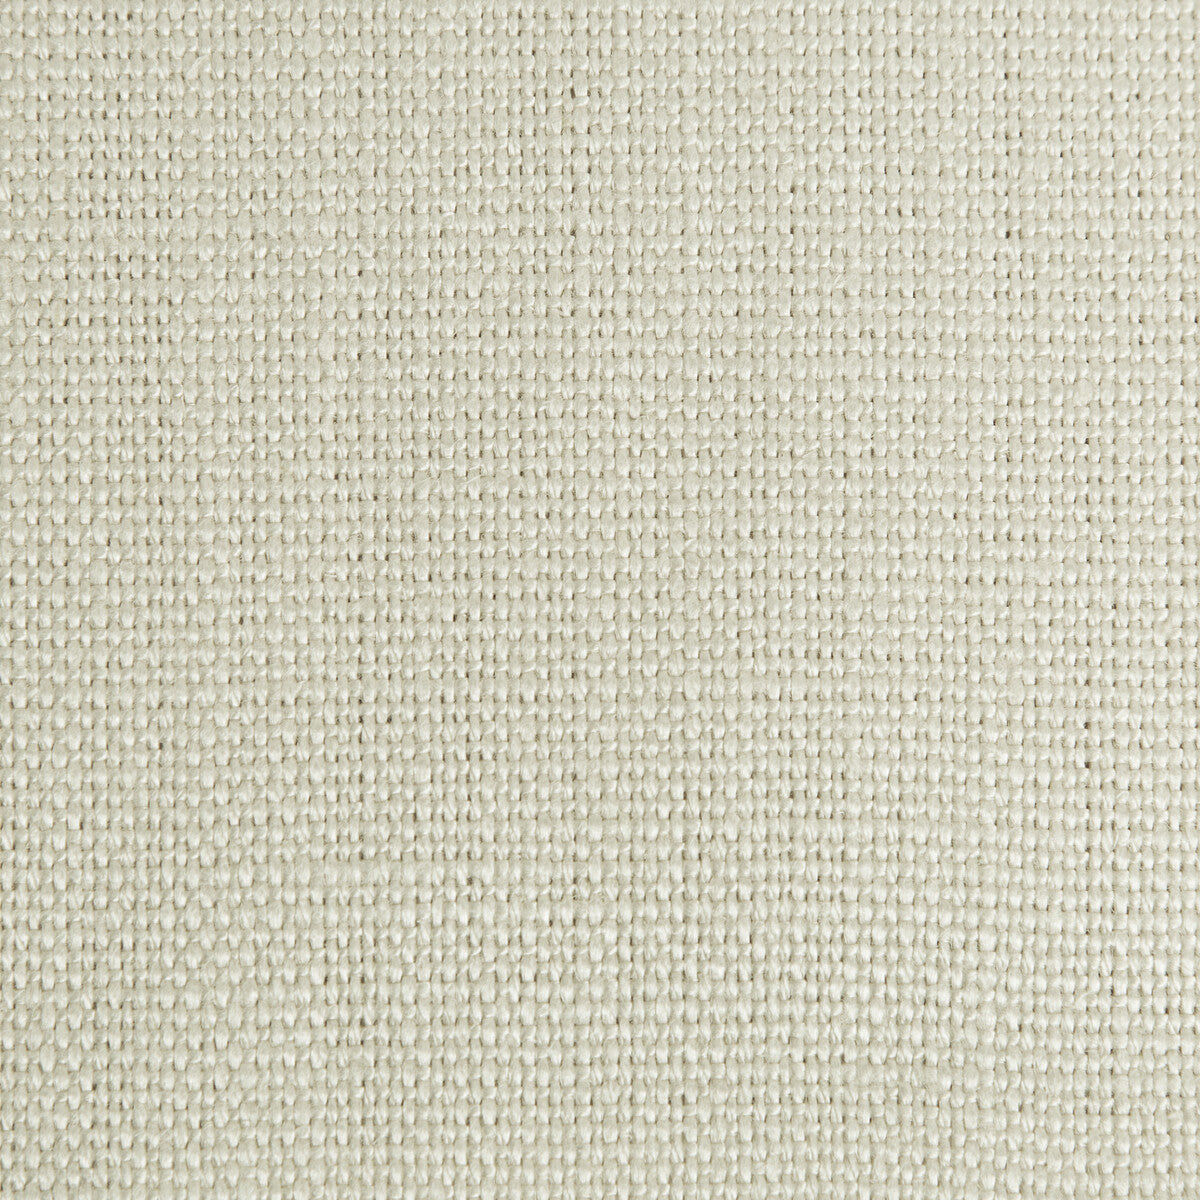 Kravet Couture fabric in 34813-1101 color - pattern 34813.1101.0 - by Kravet Couture in the Mabley Handler collection